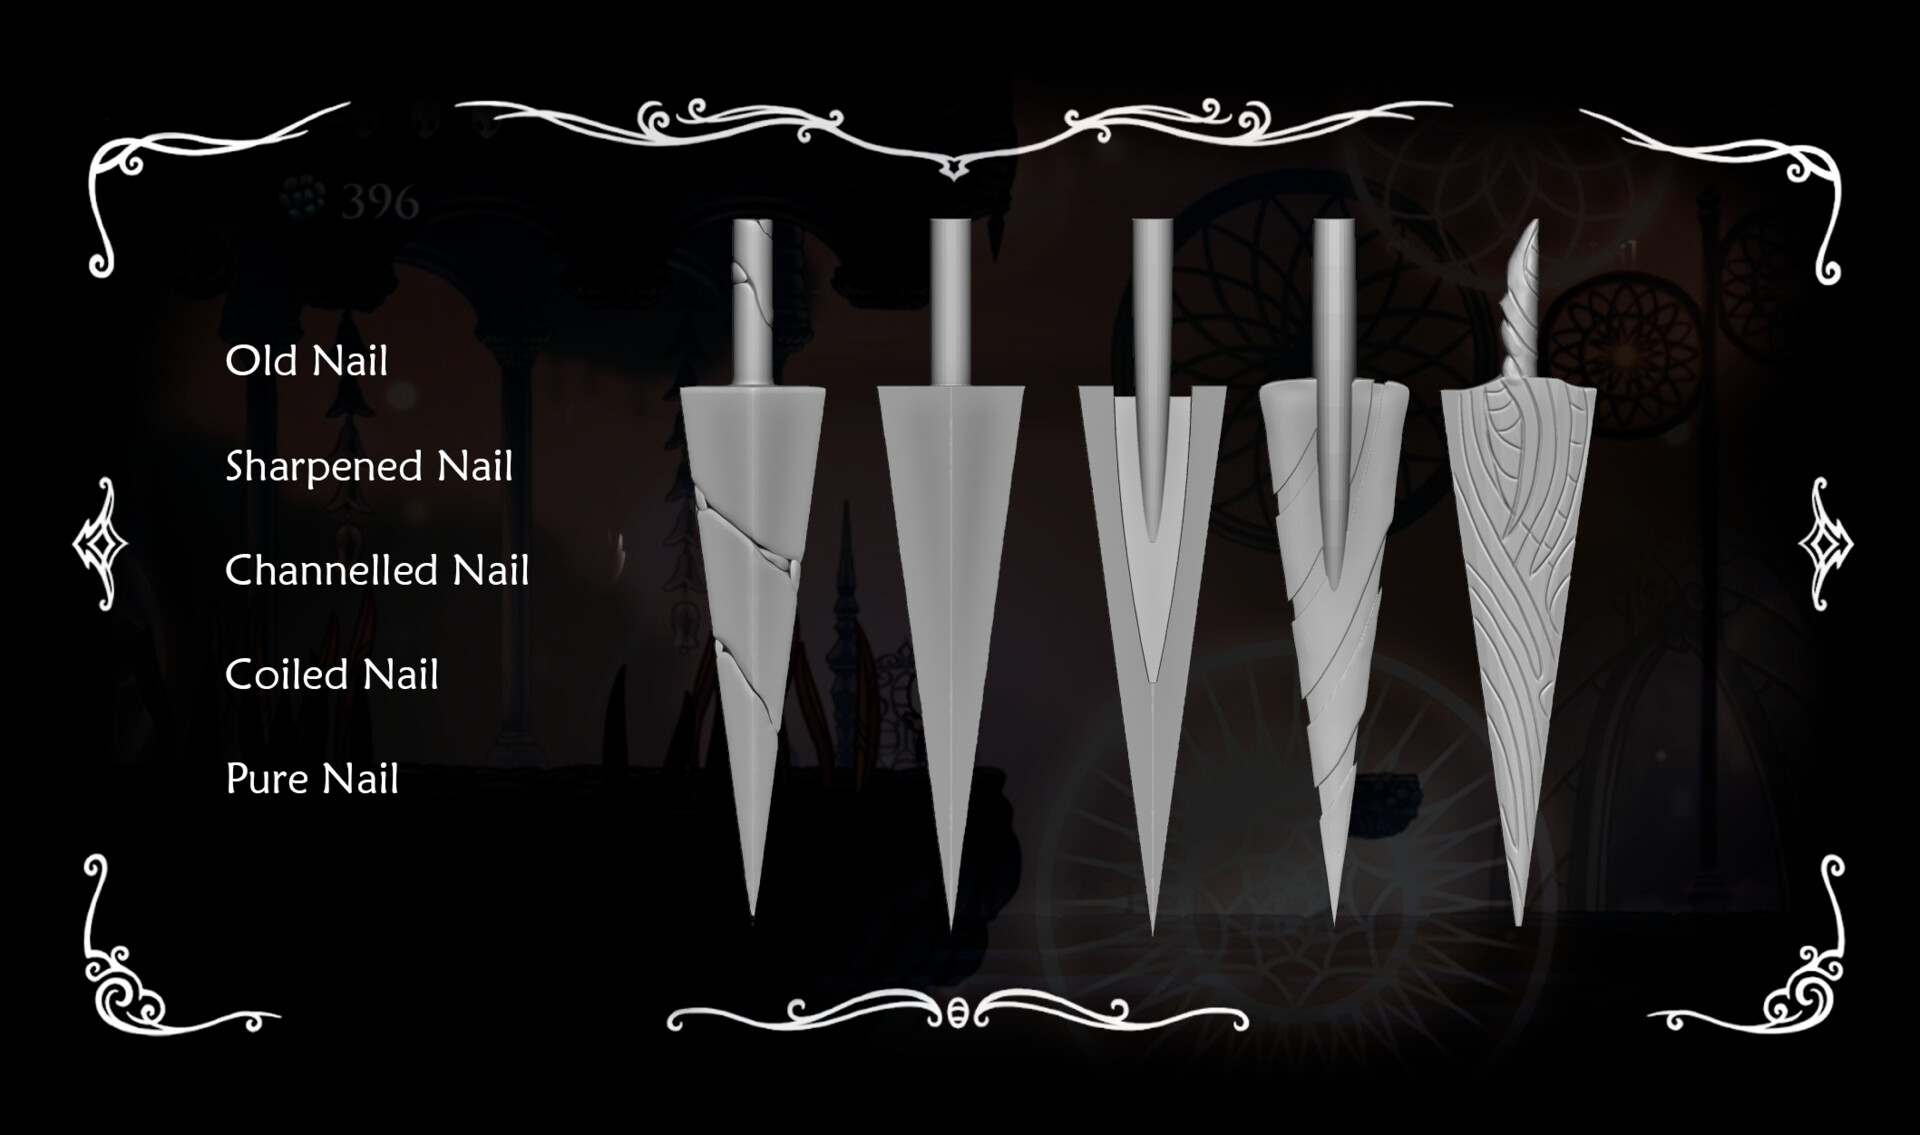 8. "Hollow Knight Nail Art for Beginners" - wide 7